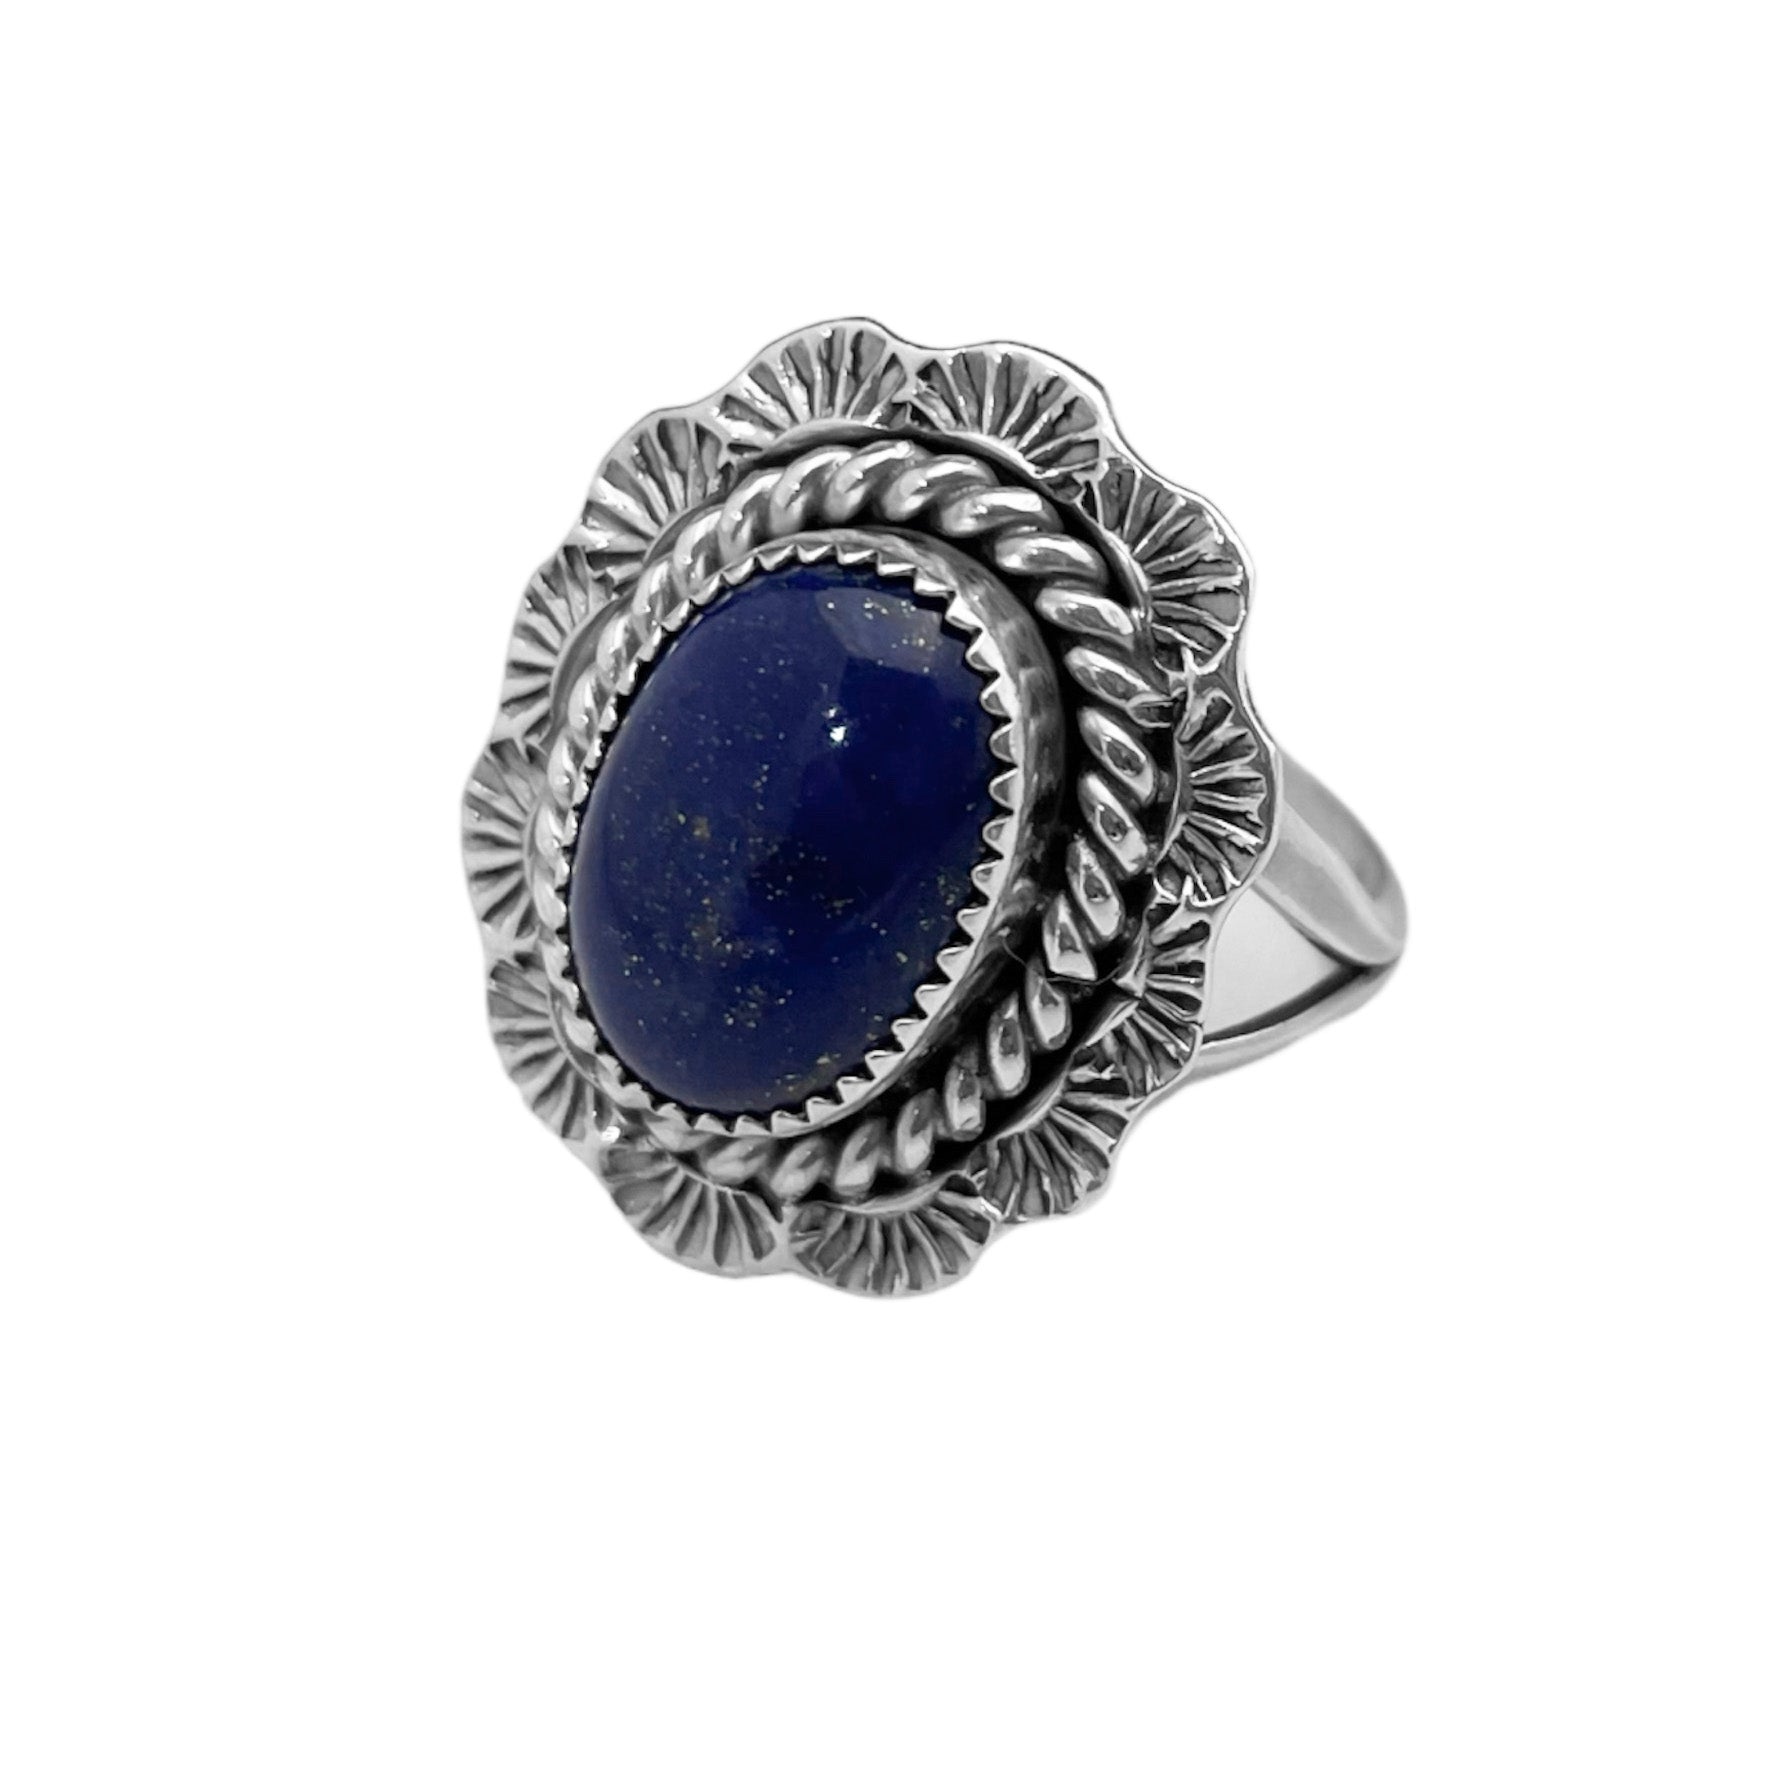 ROUND STERLING SILVER LAPIS RING